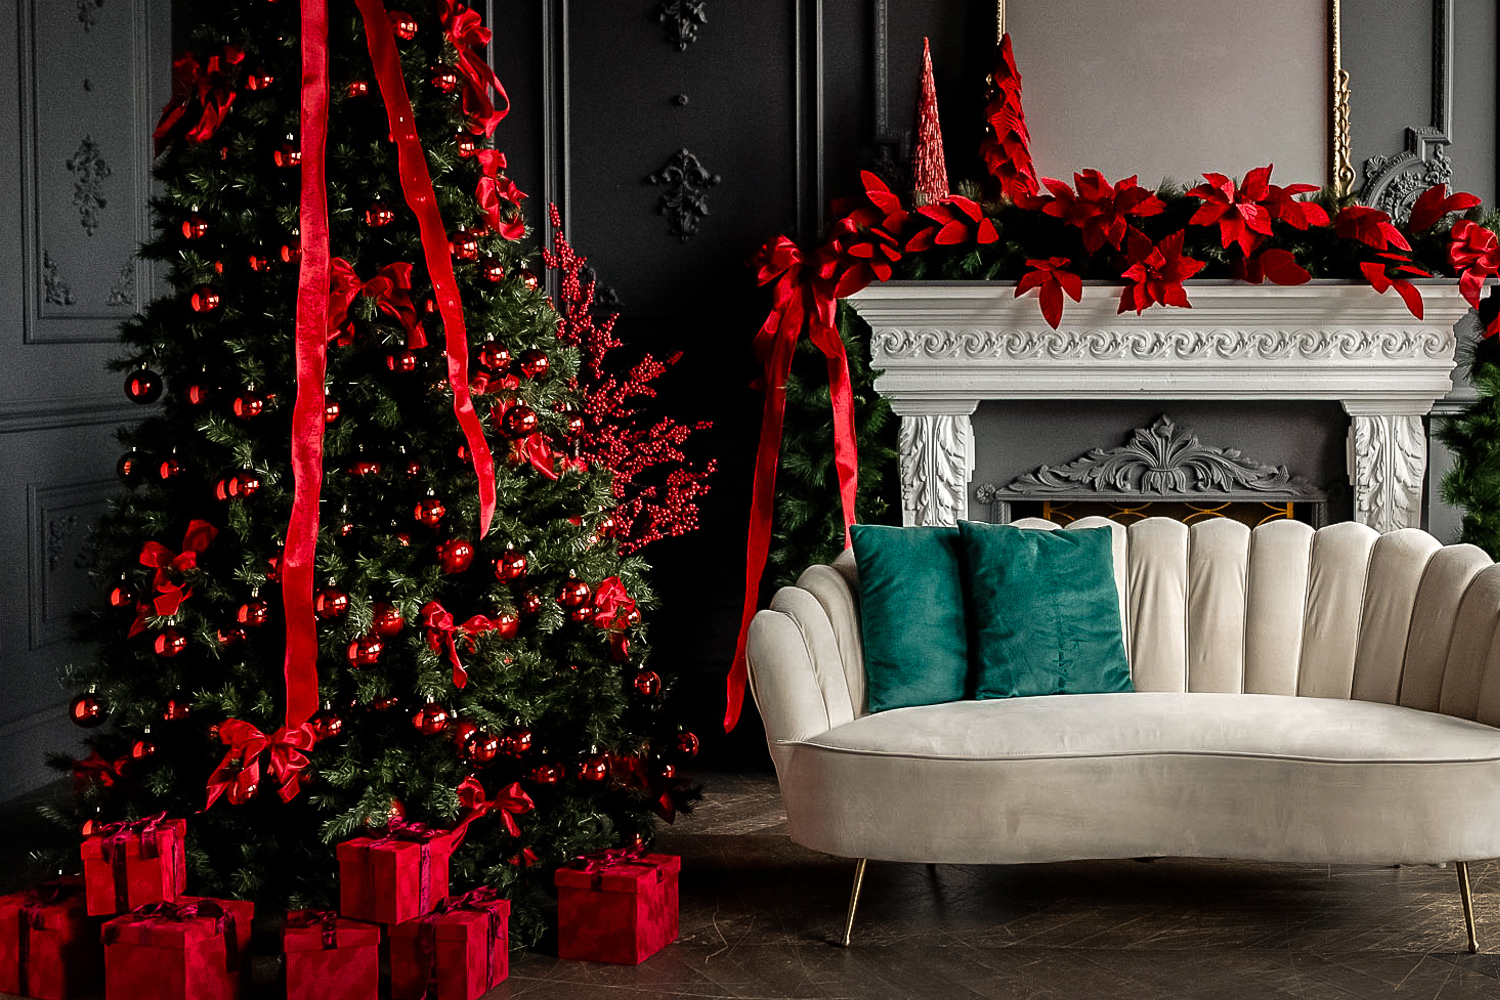 Infuse Festive Flair: 5 Creative Ways to Style Your Red Top for the Holiday Season!